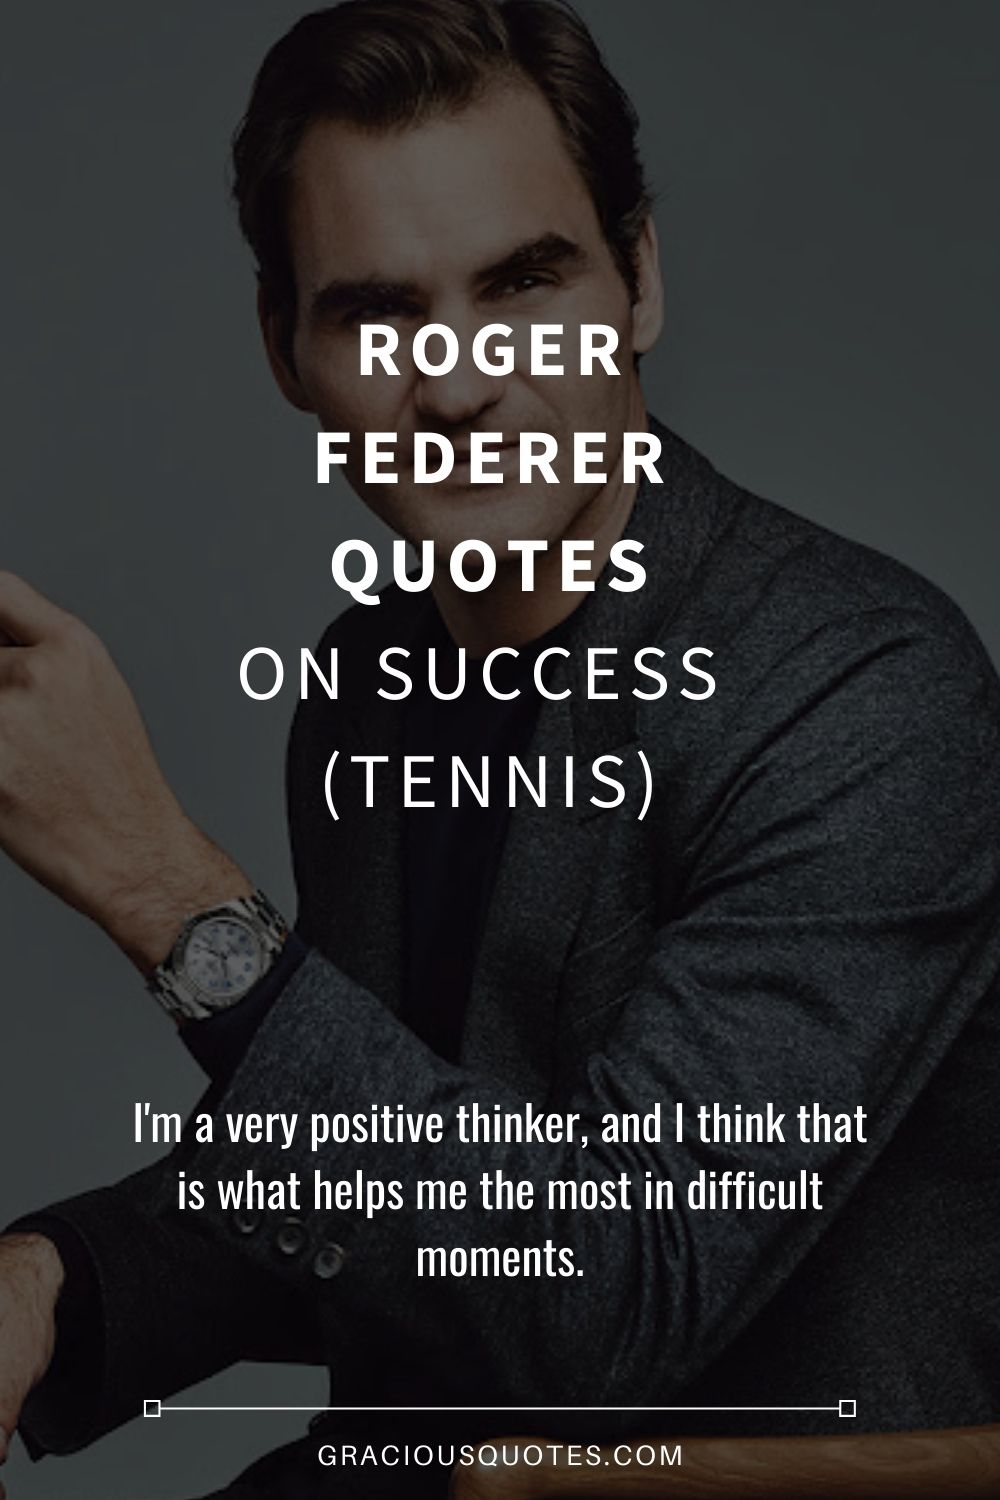 Roger Federer Quotes on Success (TENNIS) - Gracious Quotes